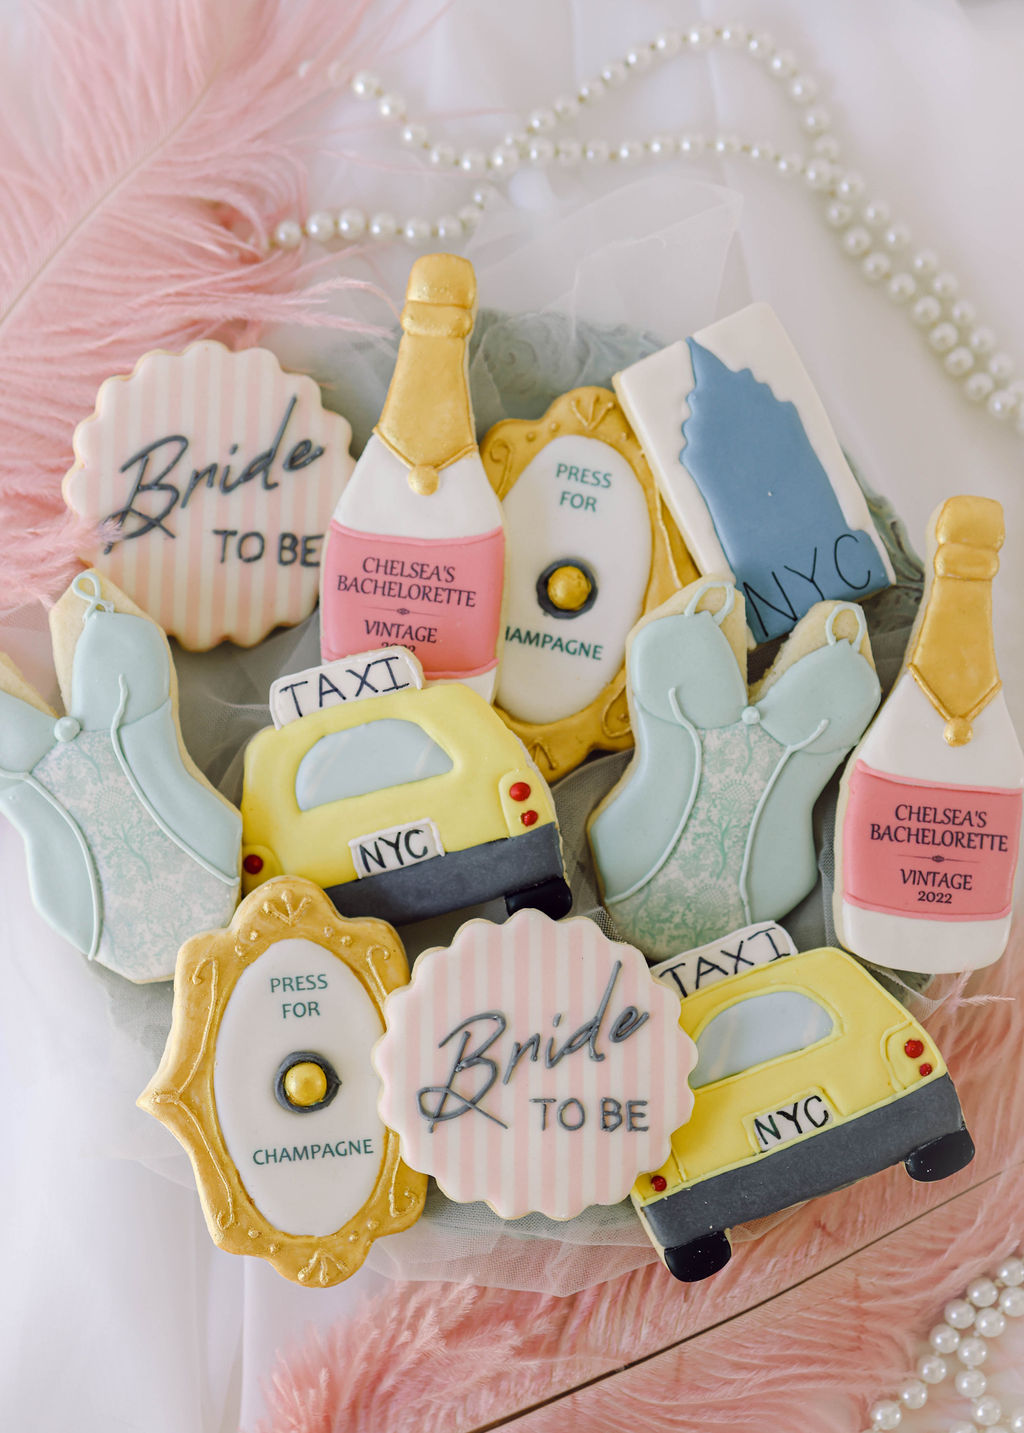 taxi champagne bottle bride to be lingerie gossip girl sex and the cityNew York City themed bachelorette fondant cookies